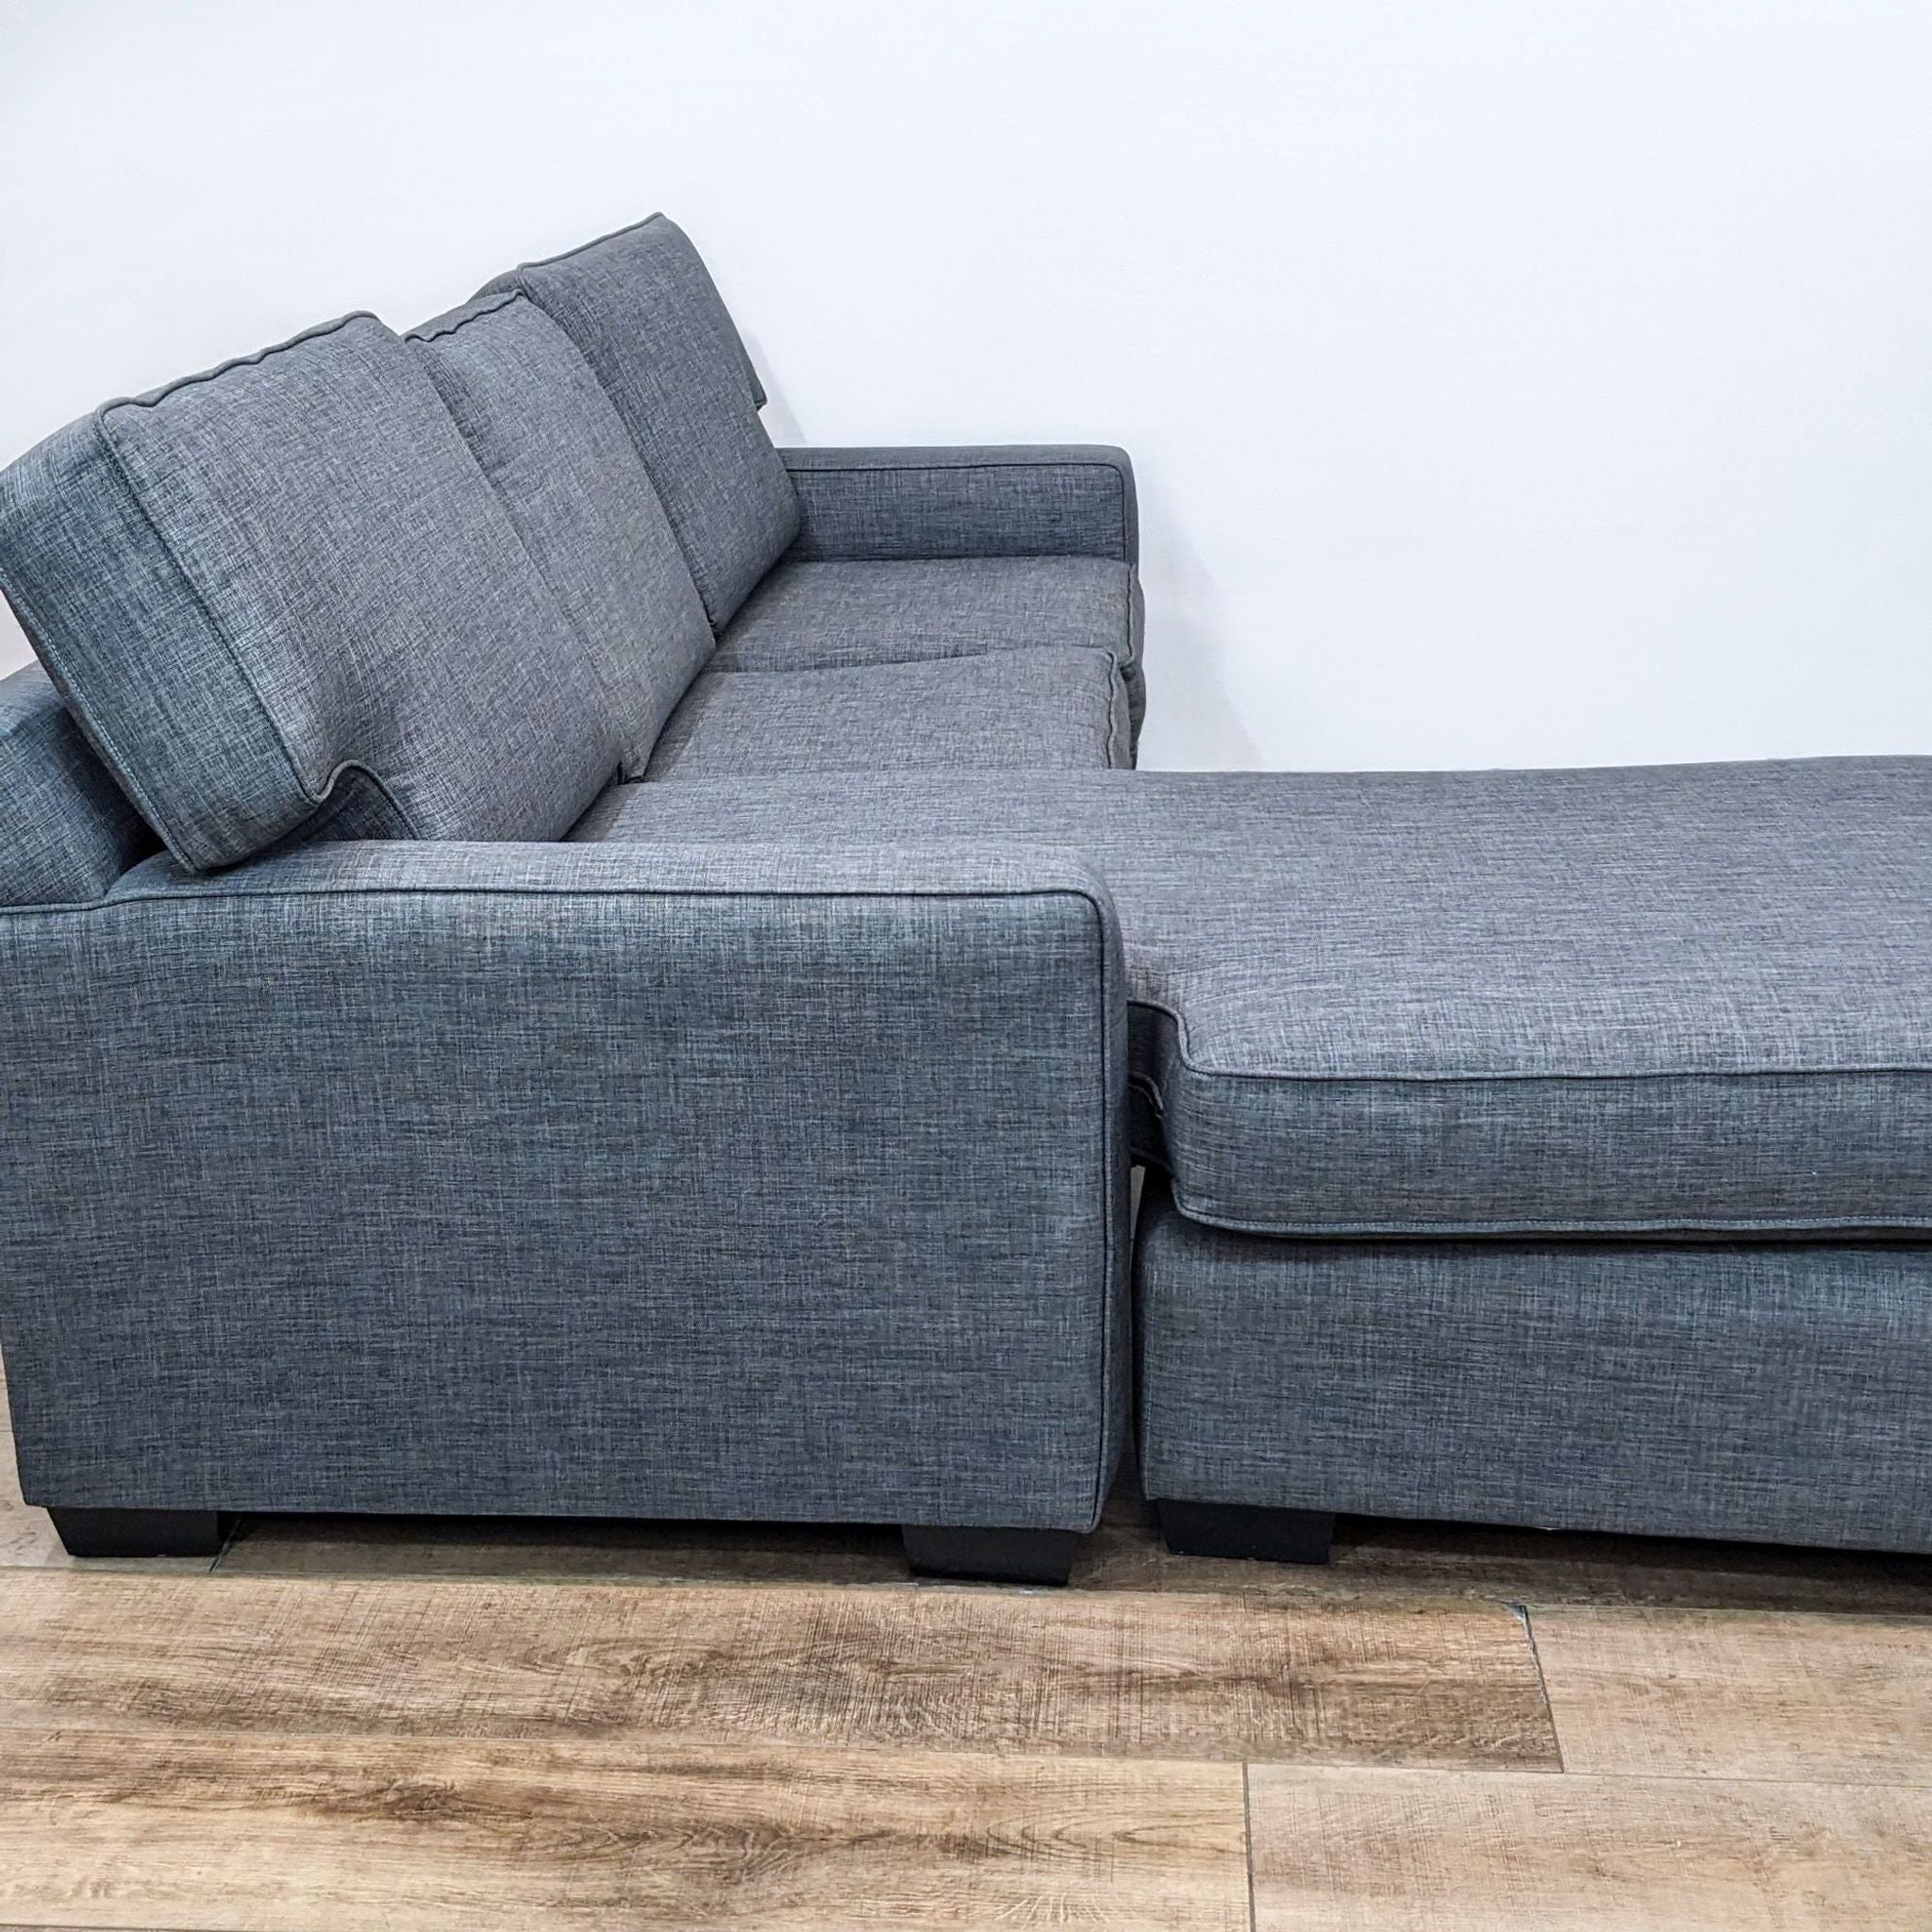 Alt text: Reperch Clean Line 94" gray sectional with reversible ottoman chaise and T-back cushions on a wood floor.